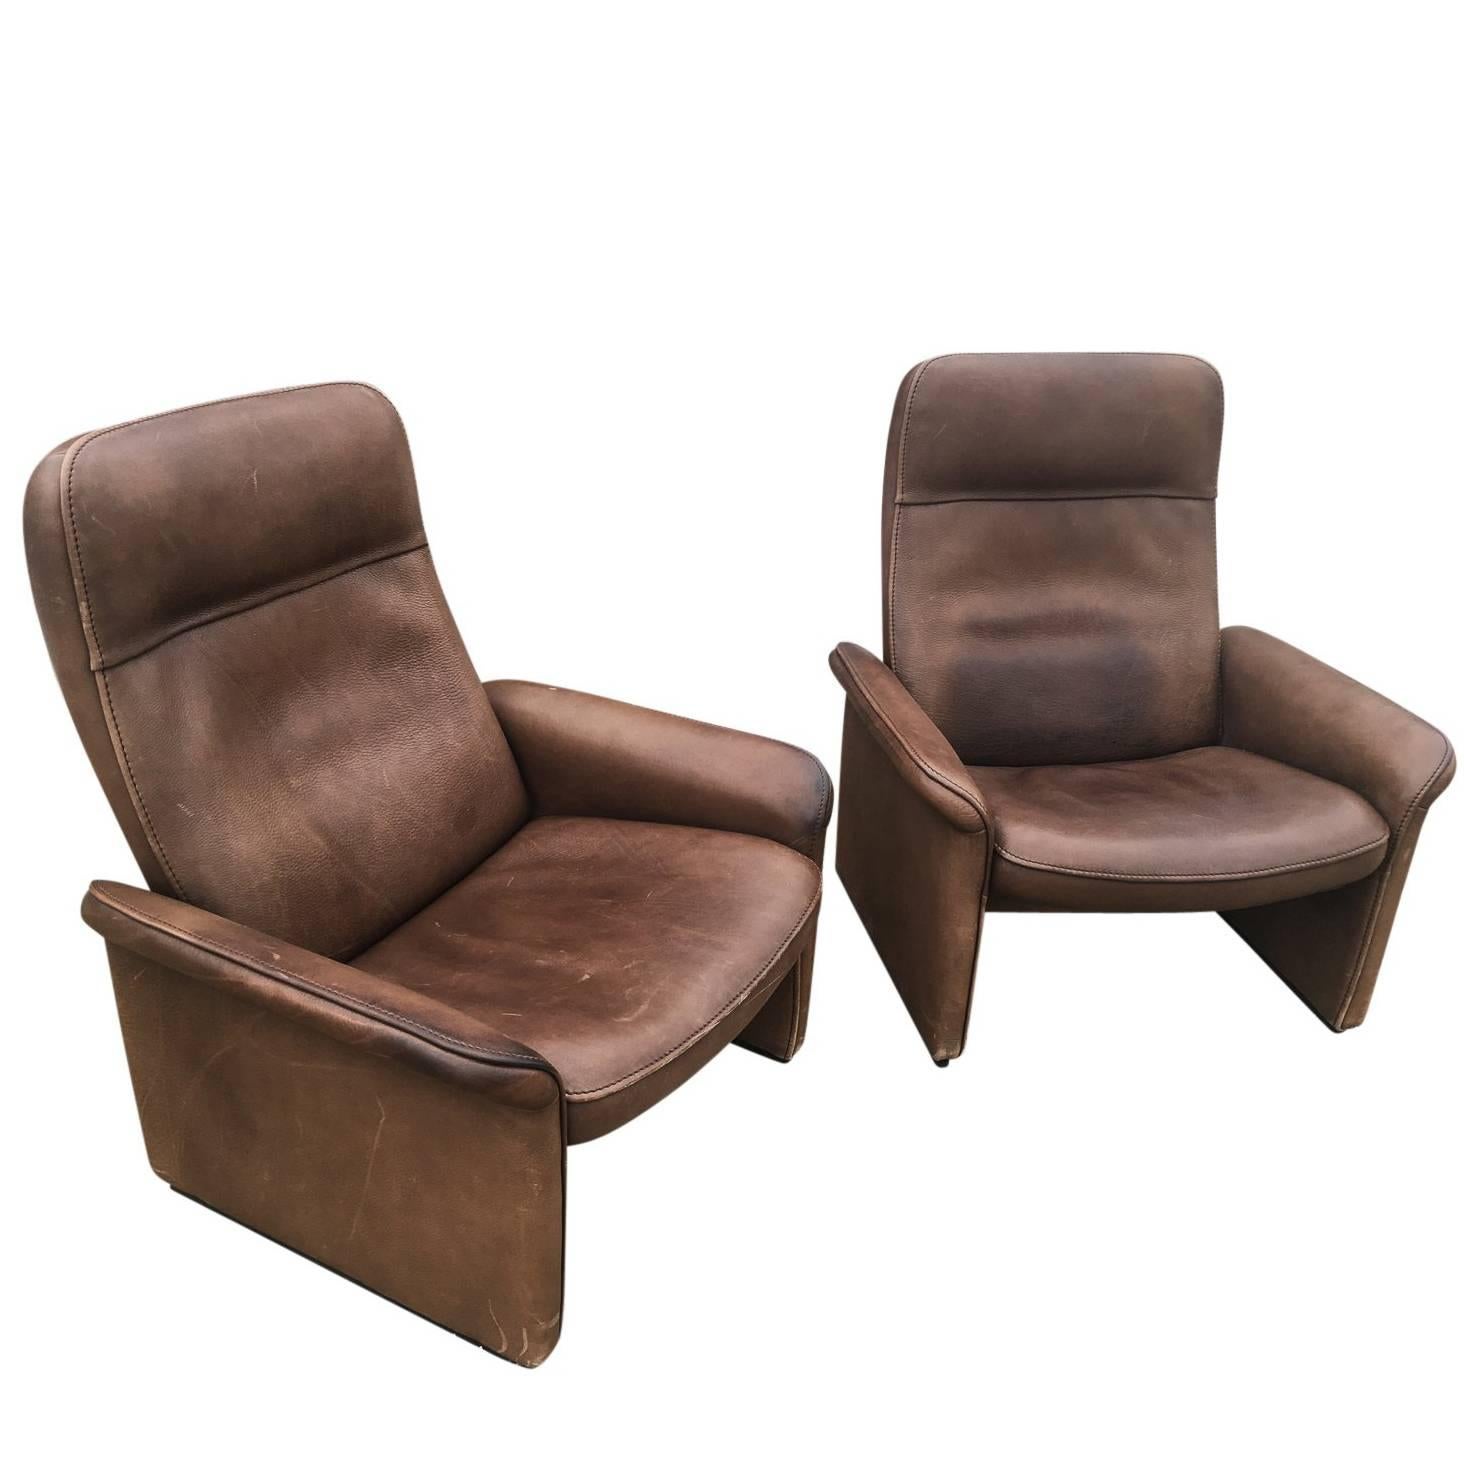 Pair of Leather Lounge Chairs Manufactured by De Sede, Switzerland